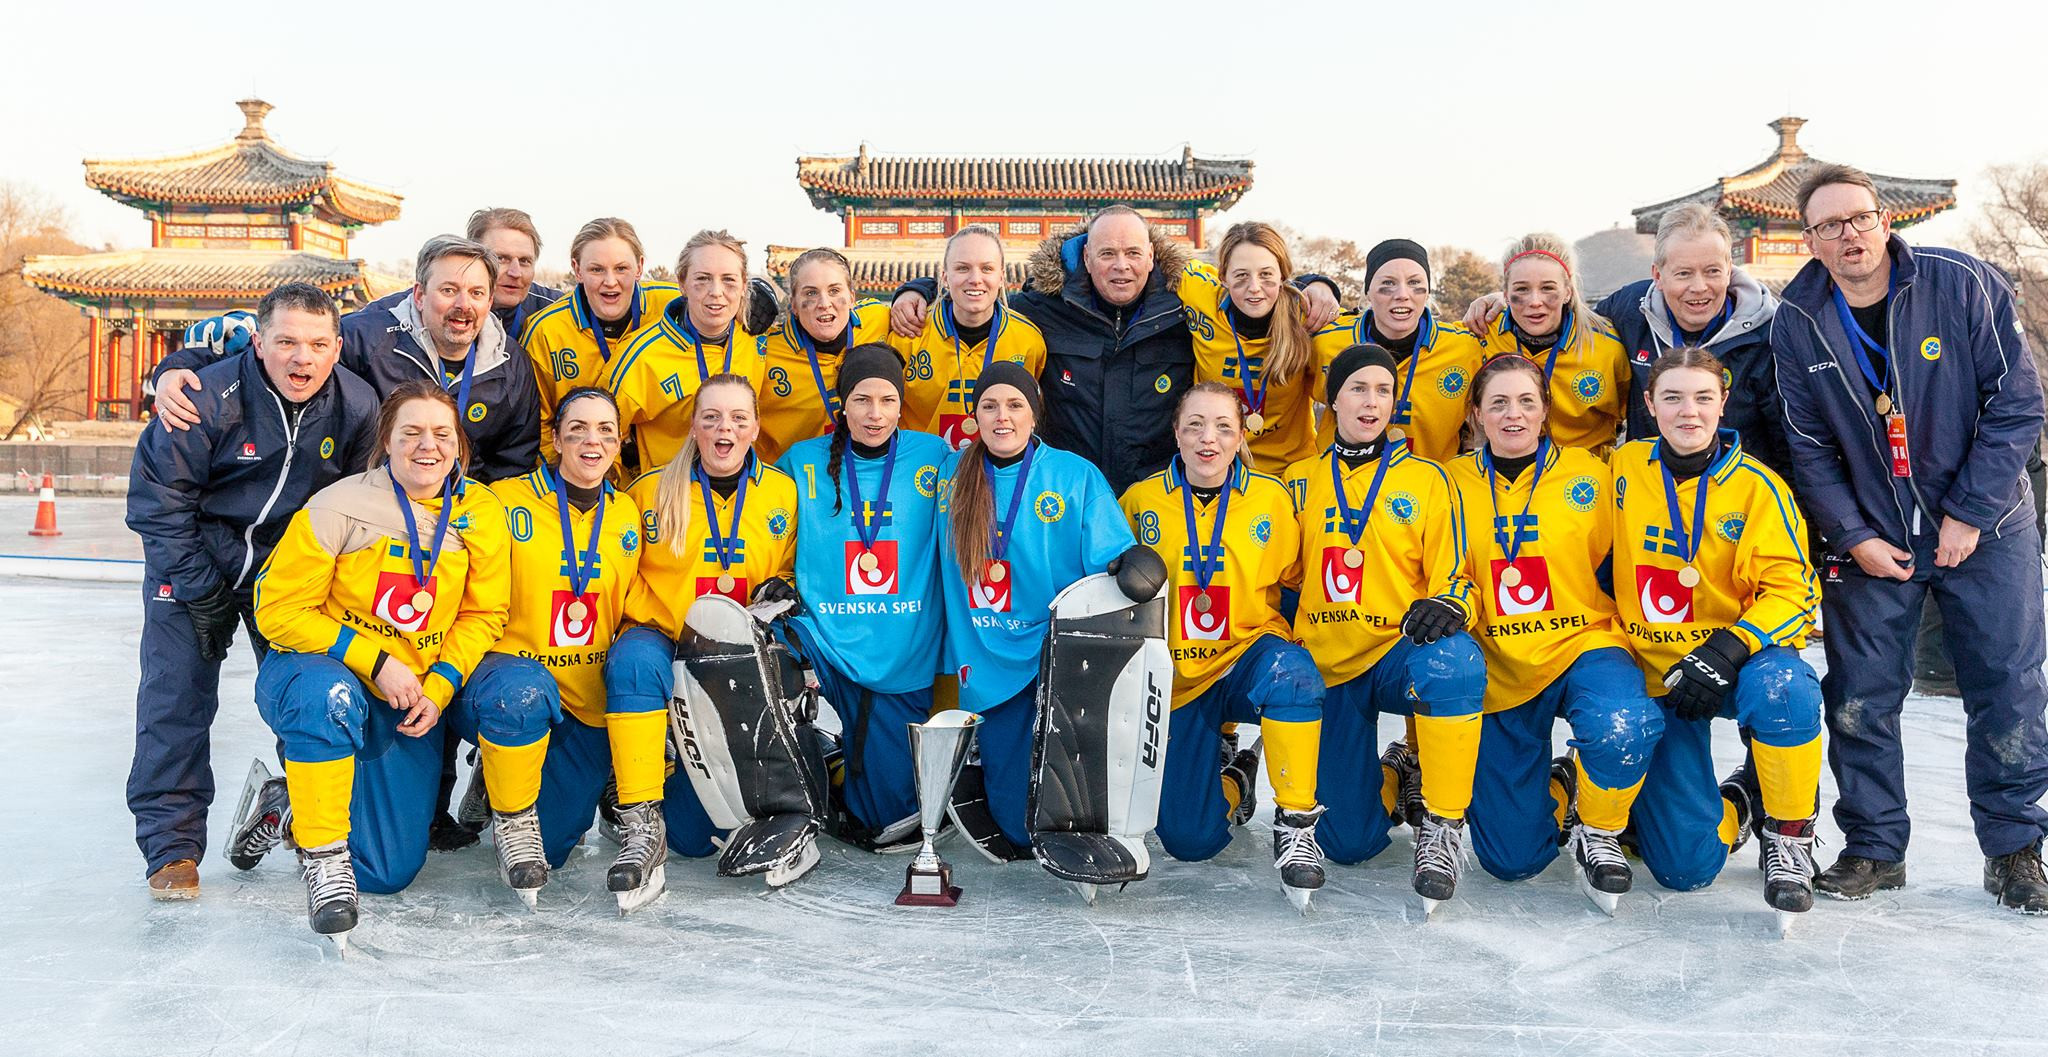 Sweden will aim to retain their Women’s Bandy World Championships title in Oslo next February ©Swedish Bandy Association